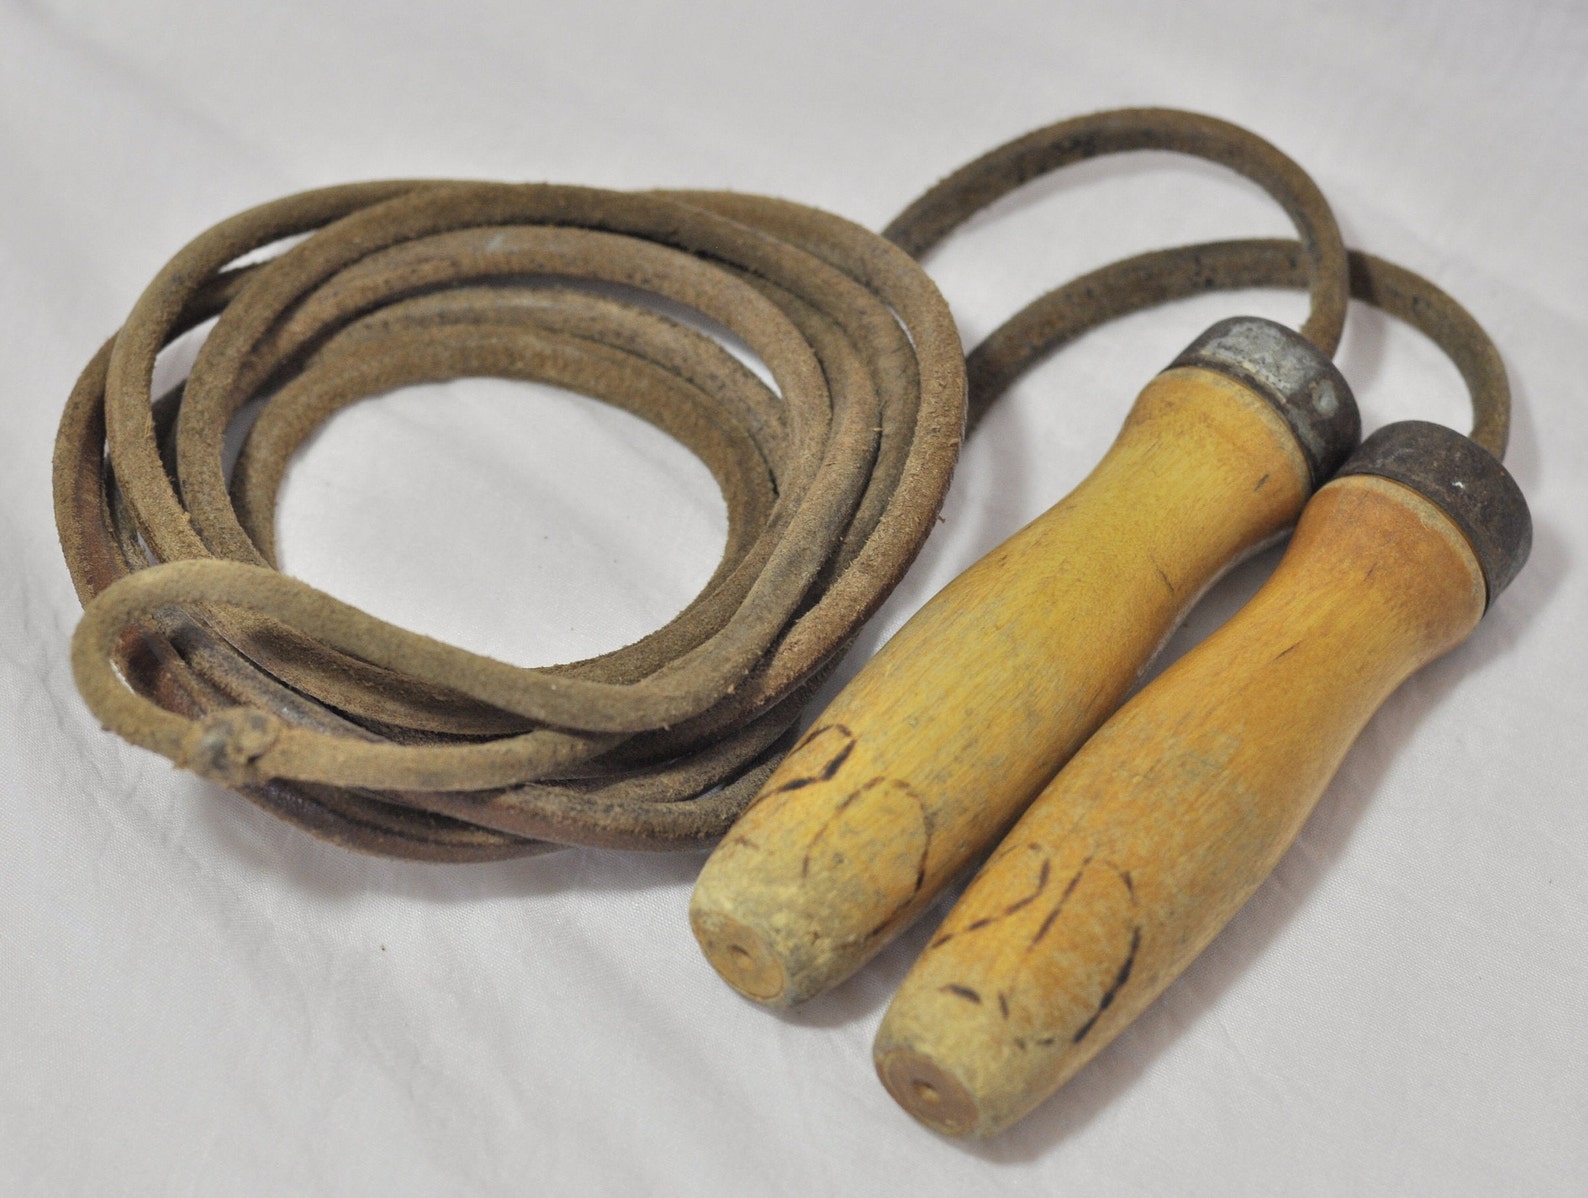 Antique Jump Rope Old School Recreation Antique Toy Jump Etsy